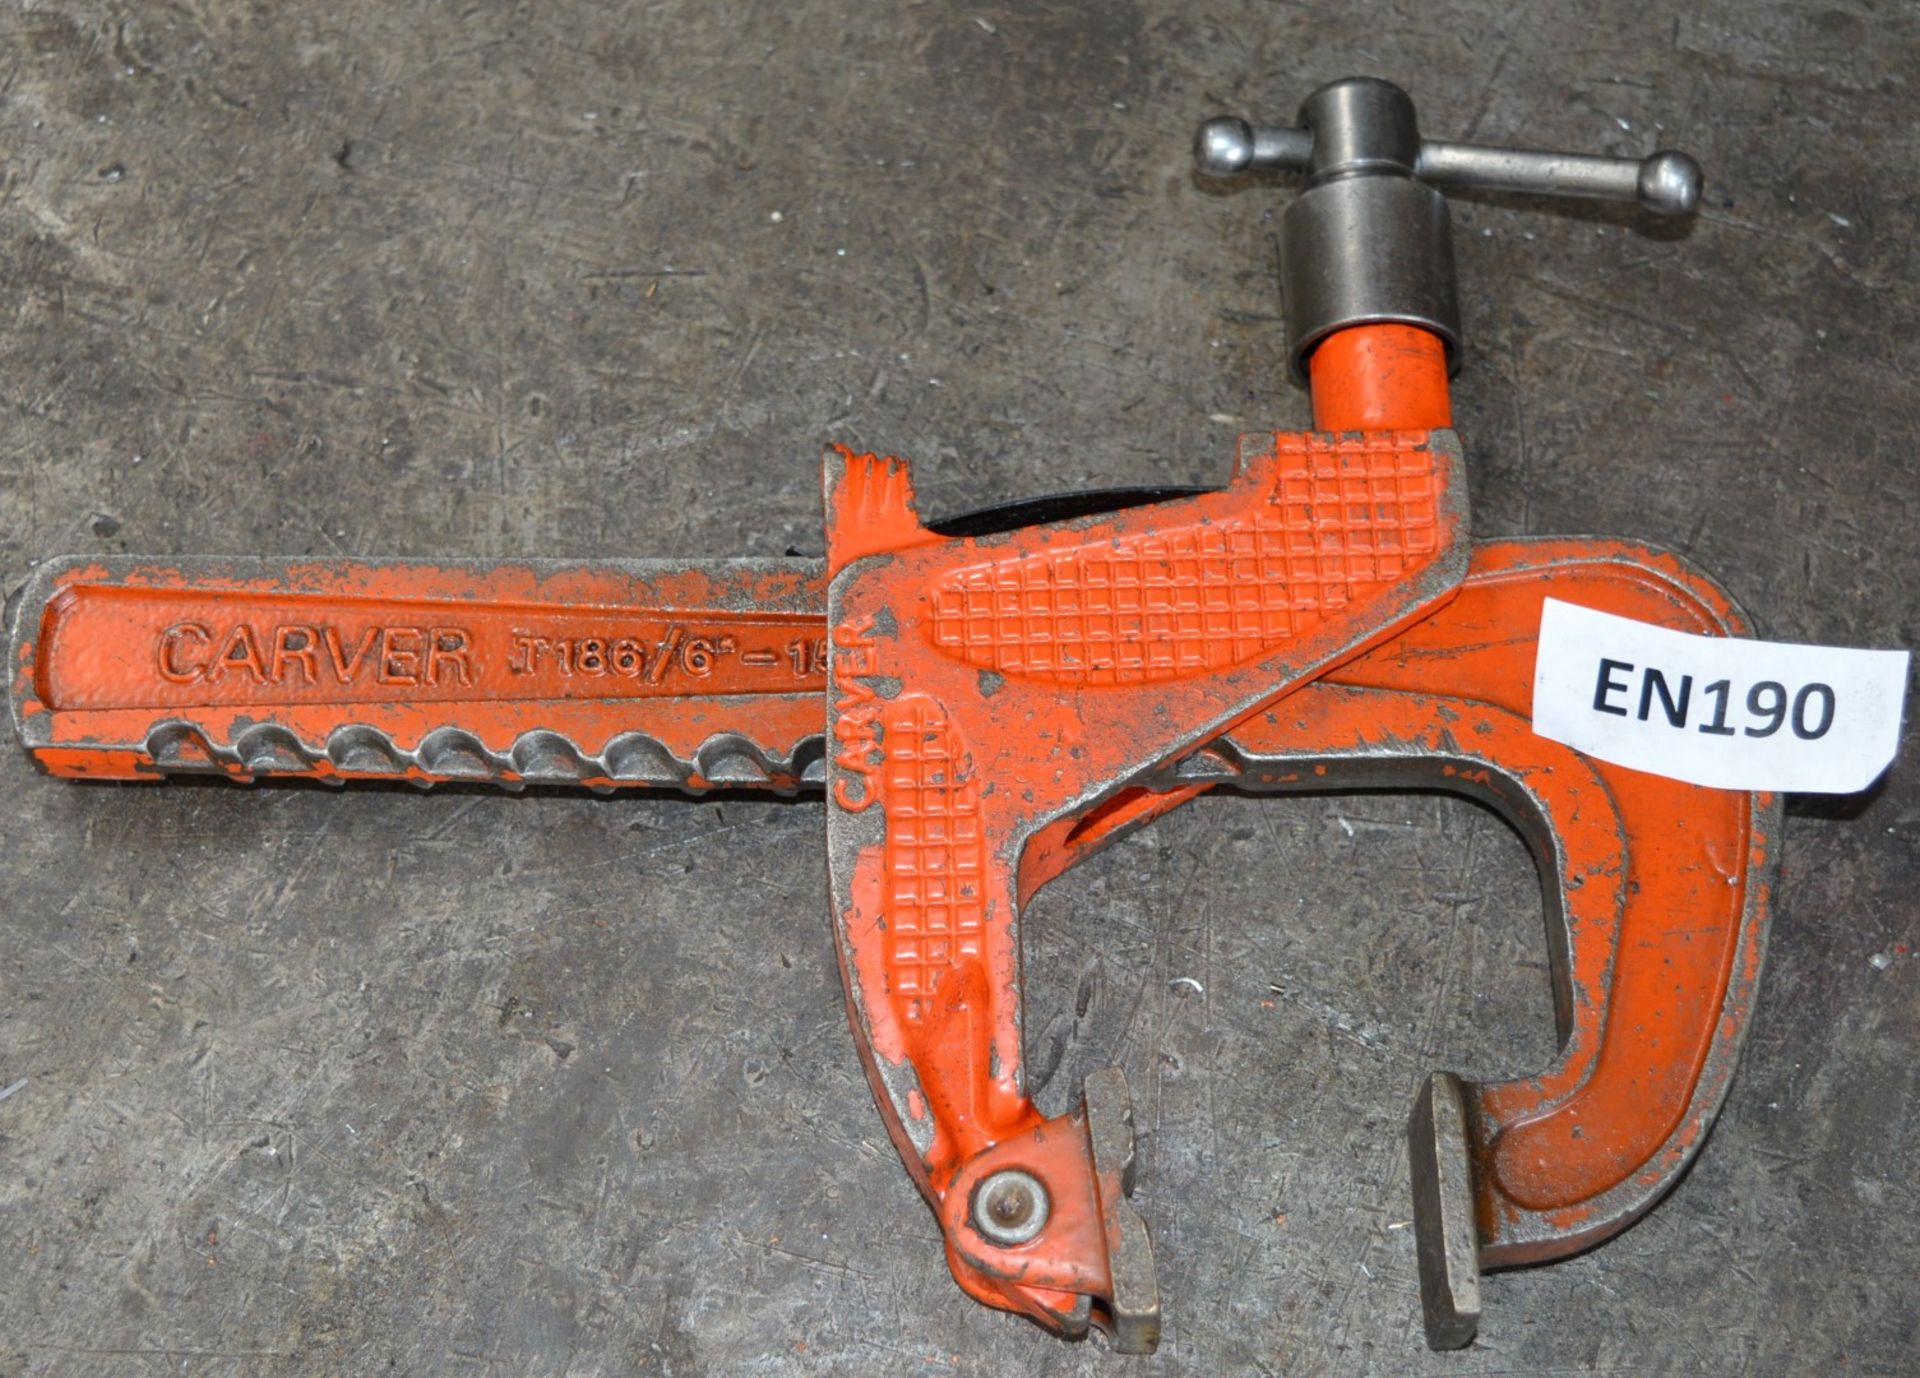 1 x Carver Heavy Duty Clamp - T186 6 Inch - CL202 -  Ref EN190 - Location: Worcester WR14